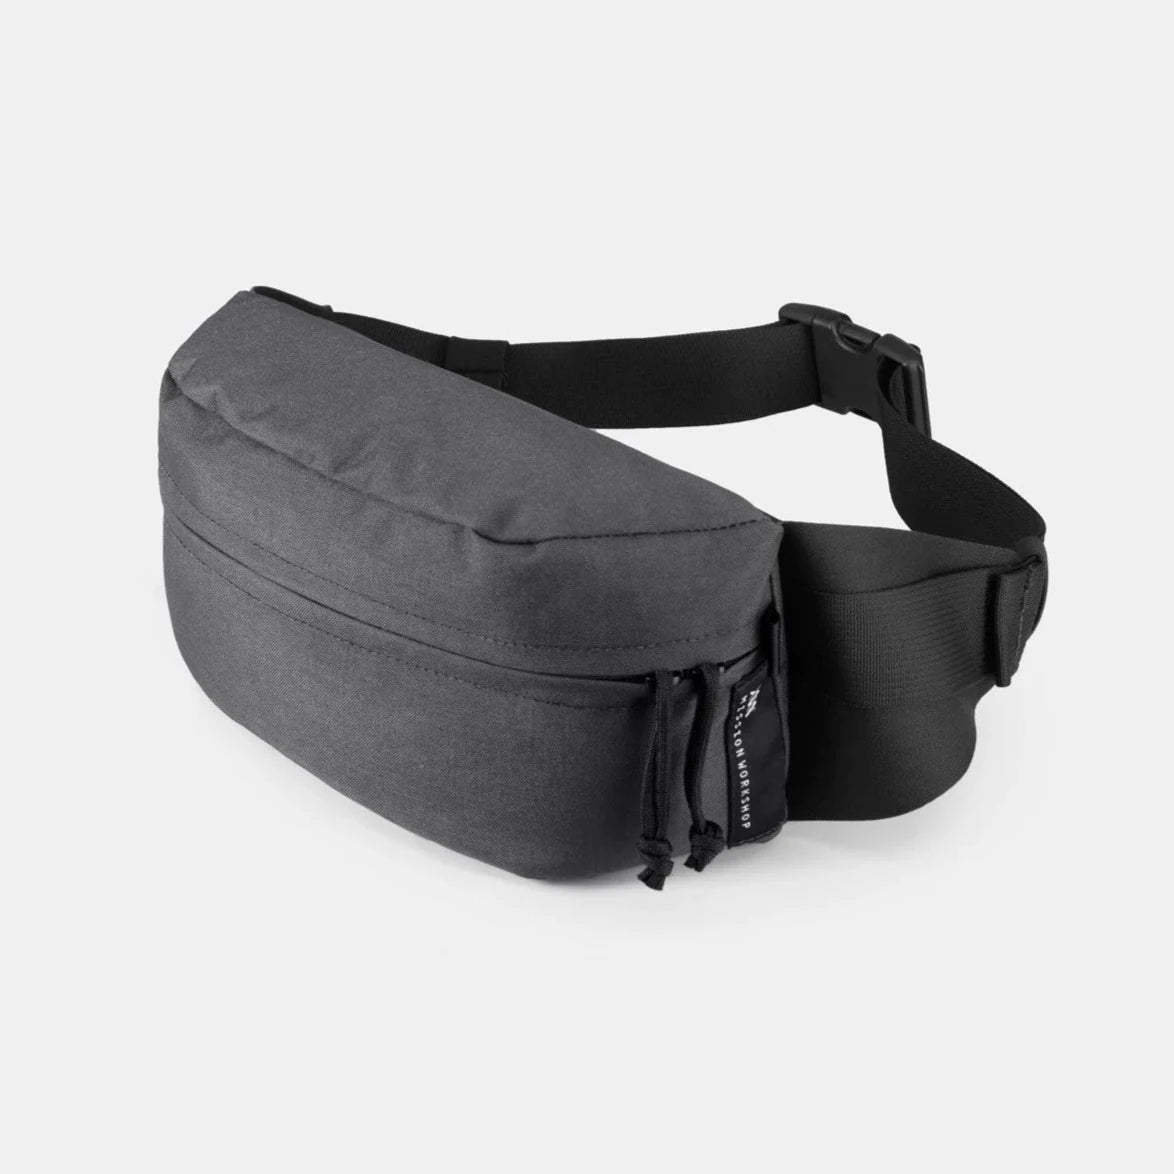 MISSION WORKSHOP Axis Waist Pack